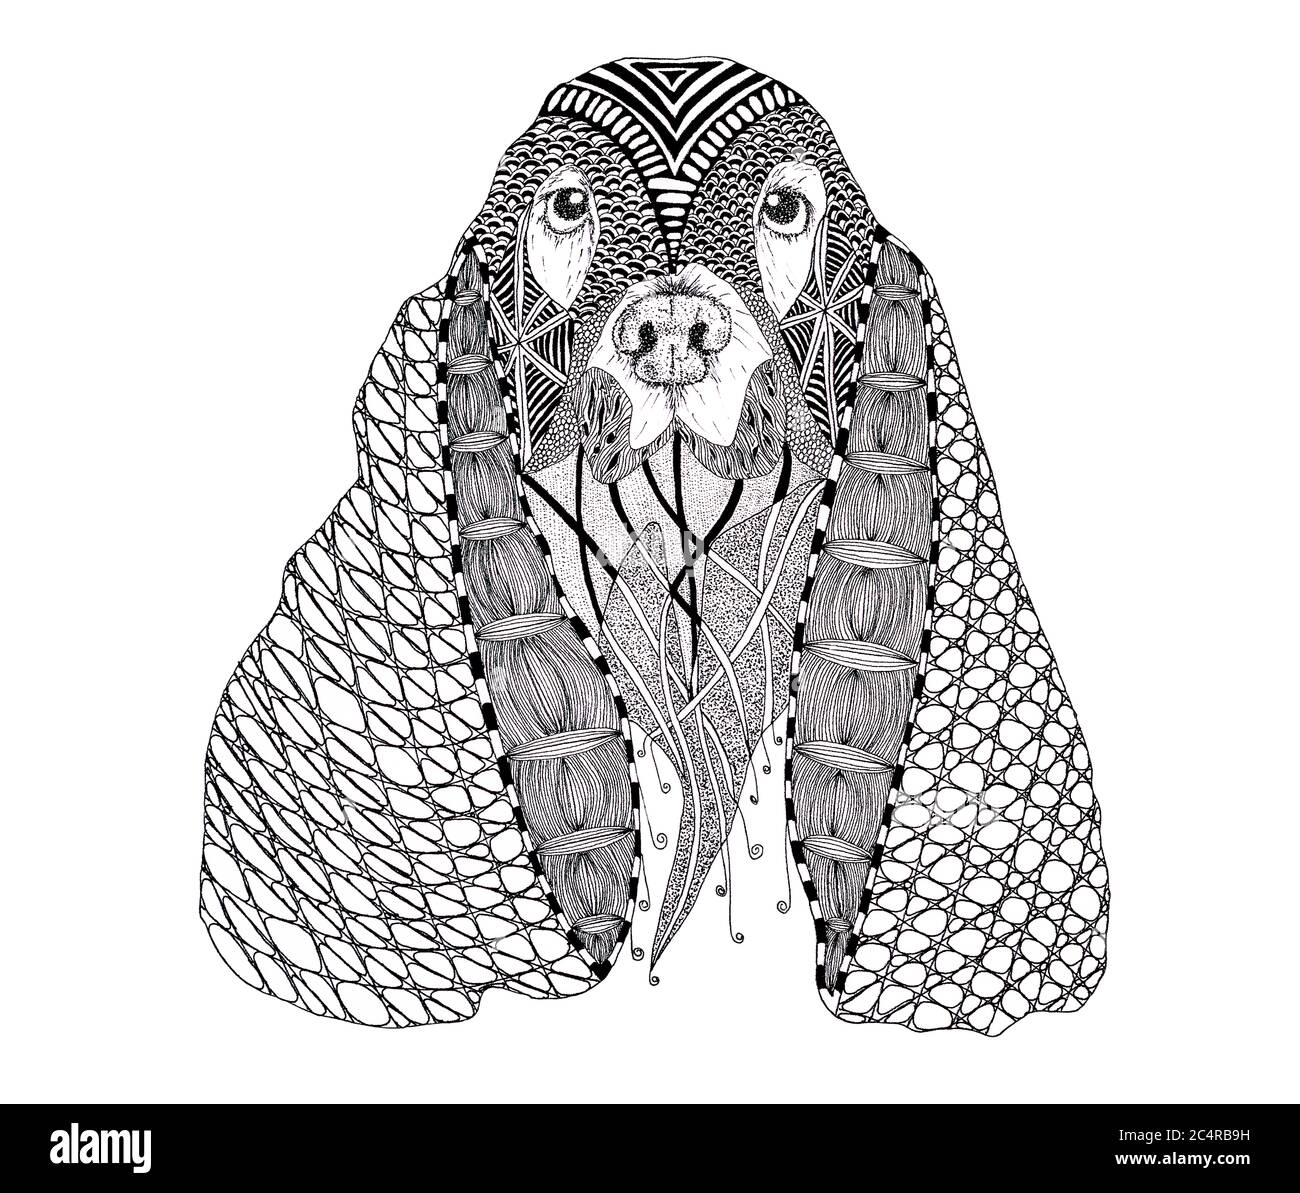 A patterned (tangled) portrait of a Spaniel. Stock Photo